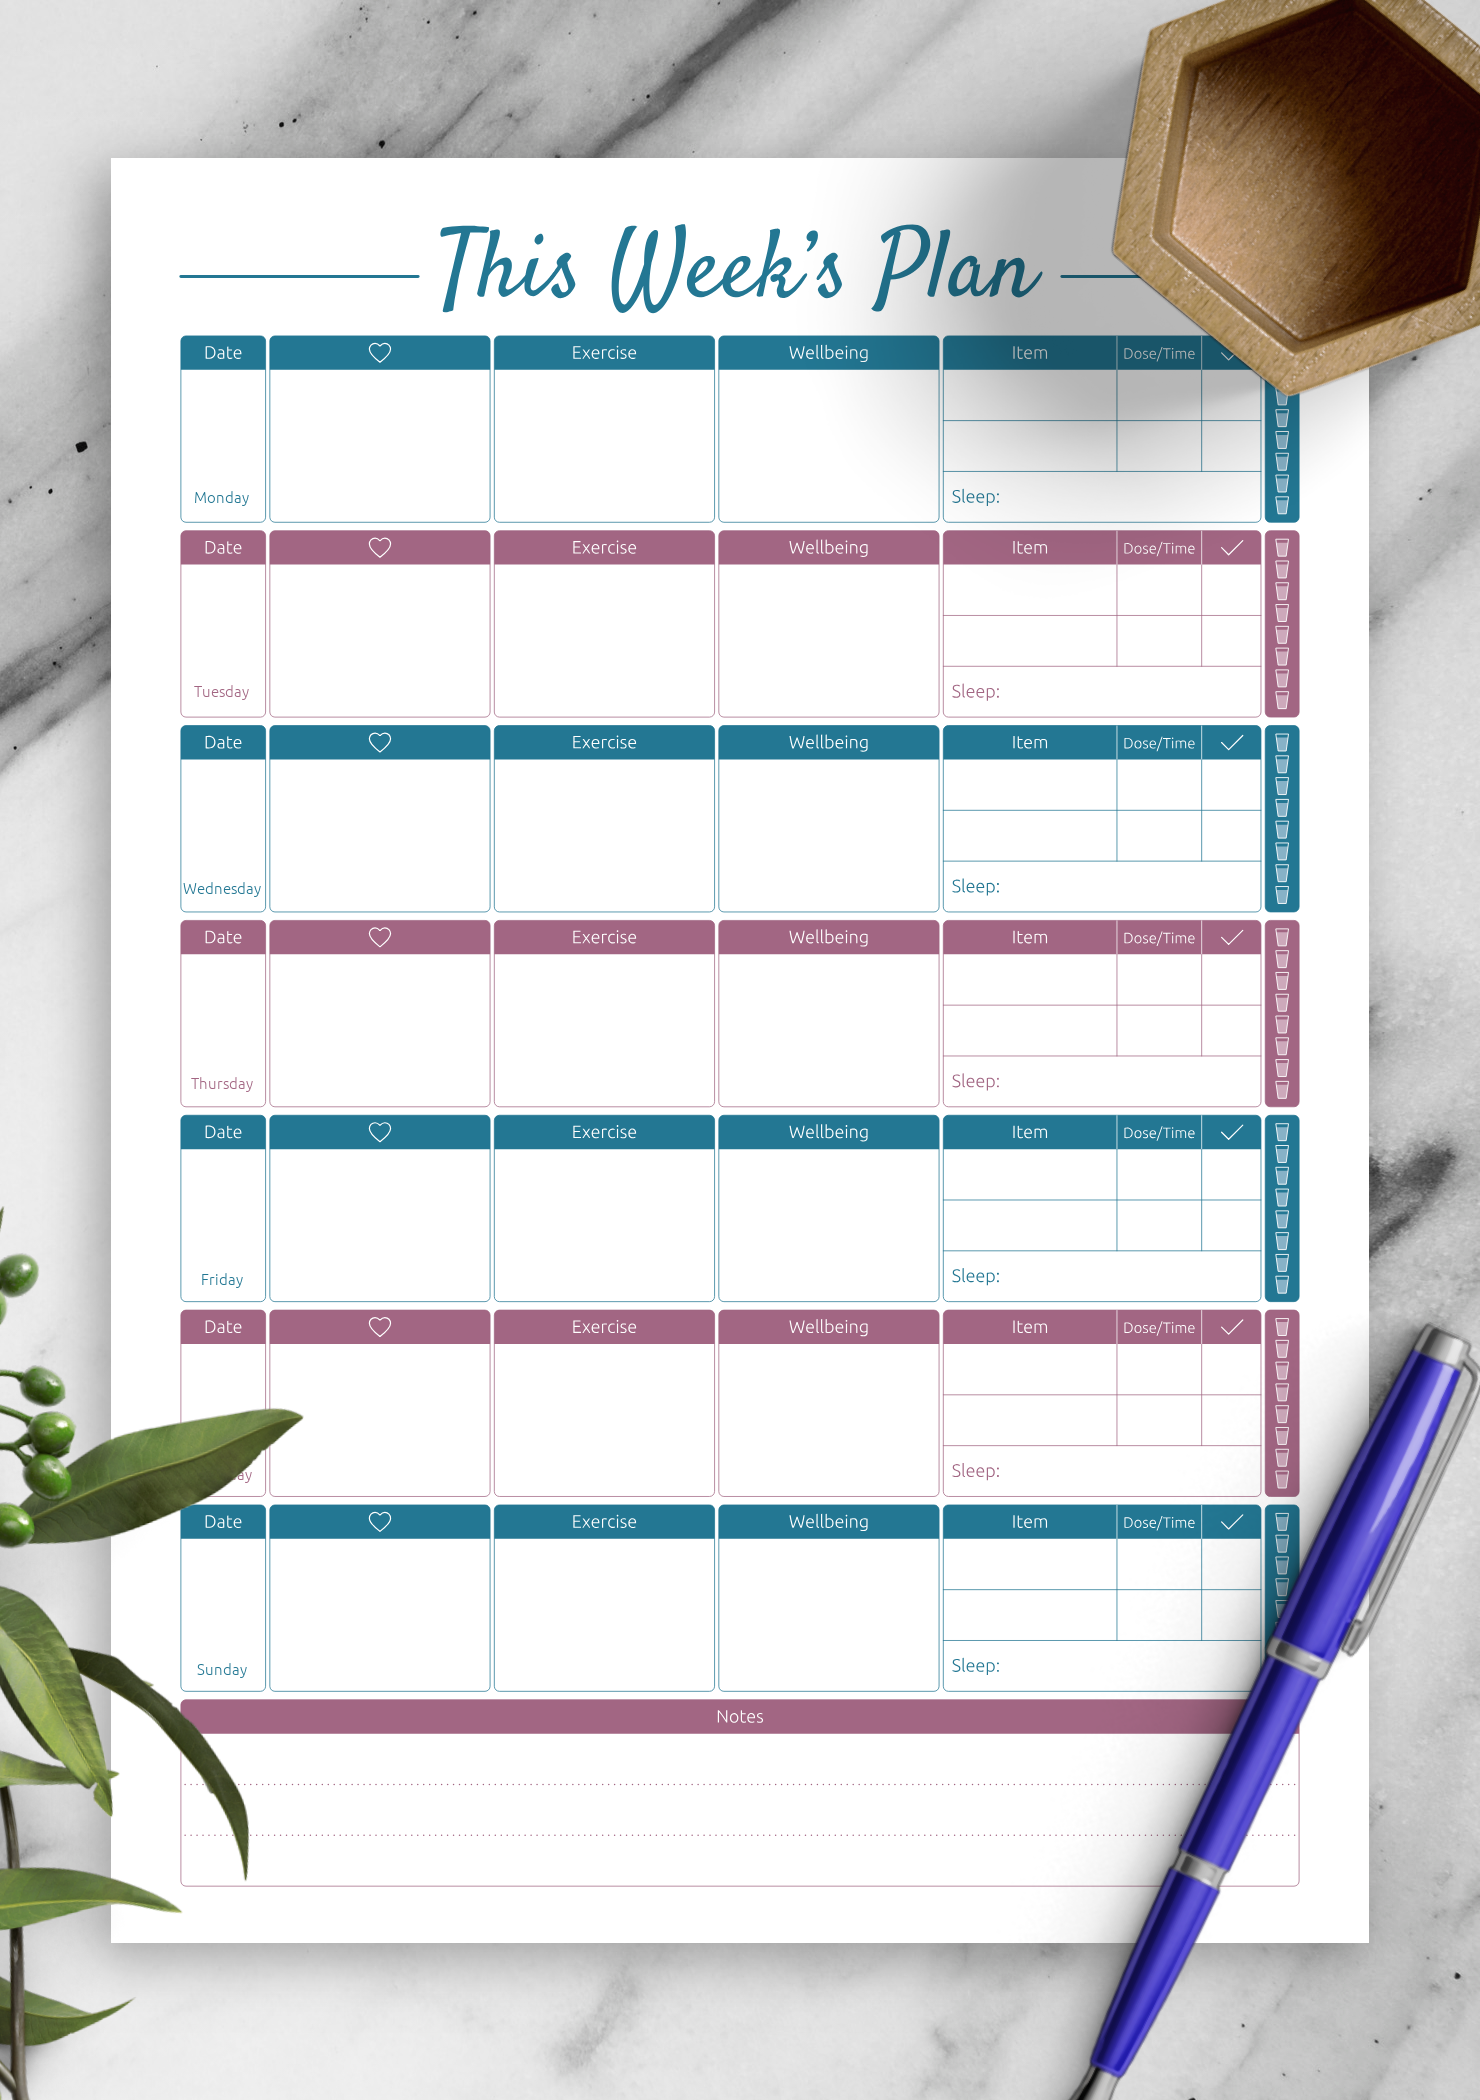 meal and exercise plan|meal and exercise tracker|weightloss|printable A4